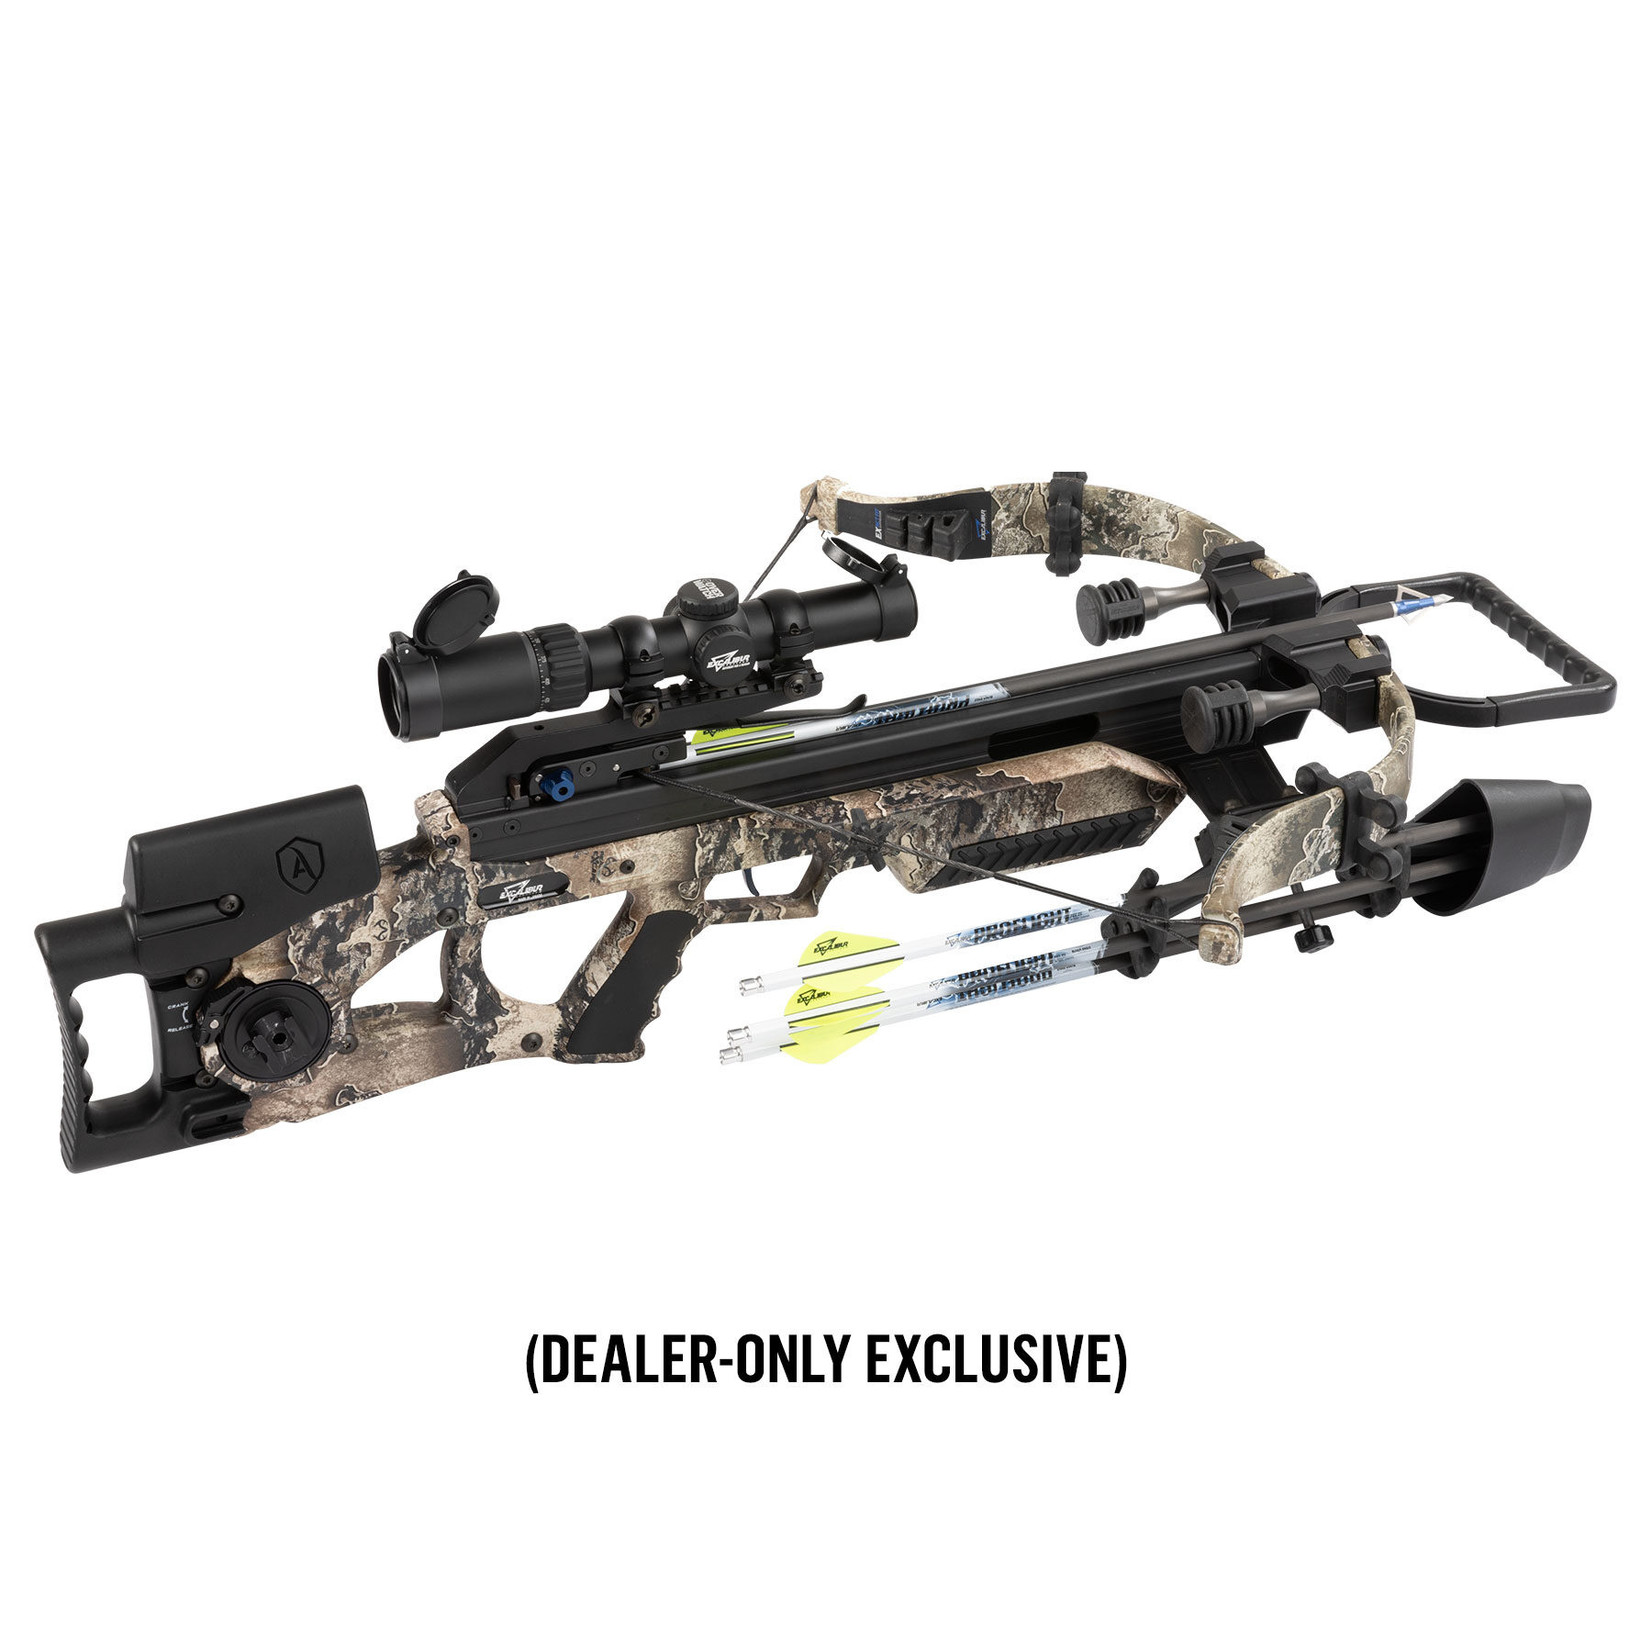 Excalibur Assassin Extreme - with Overwatch Scope